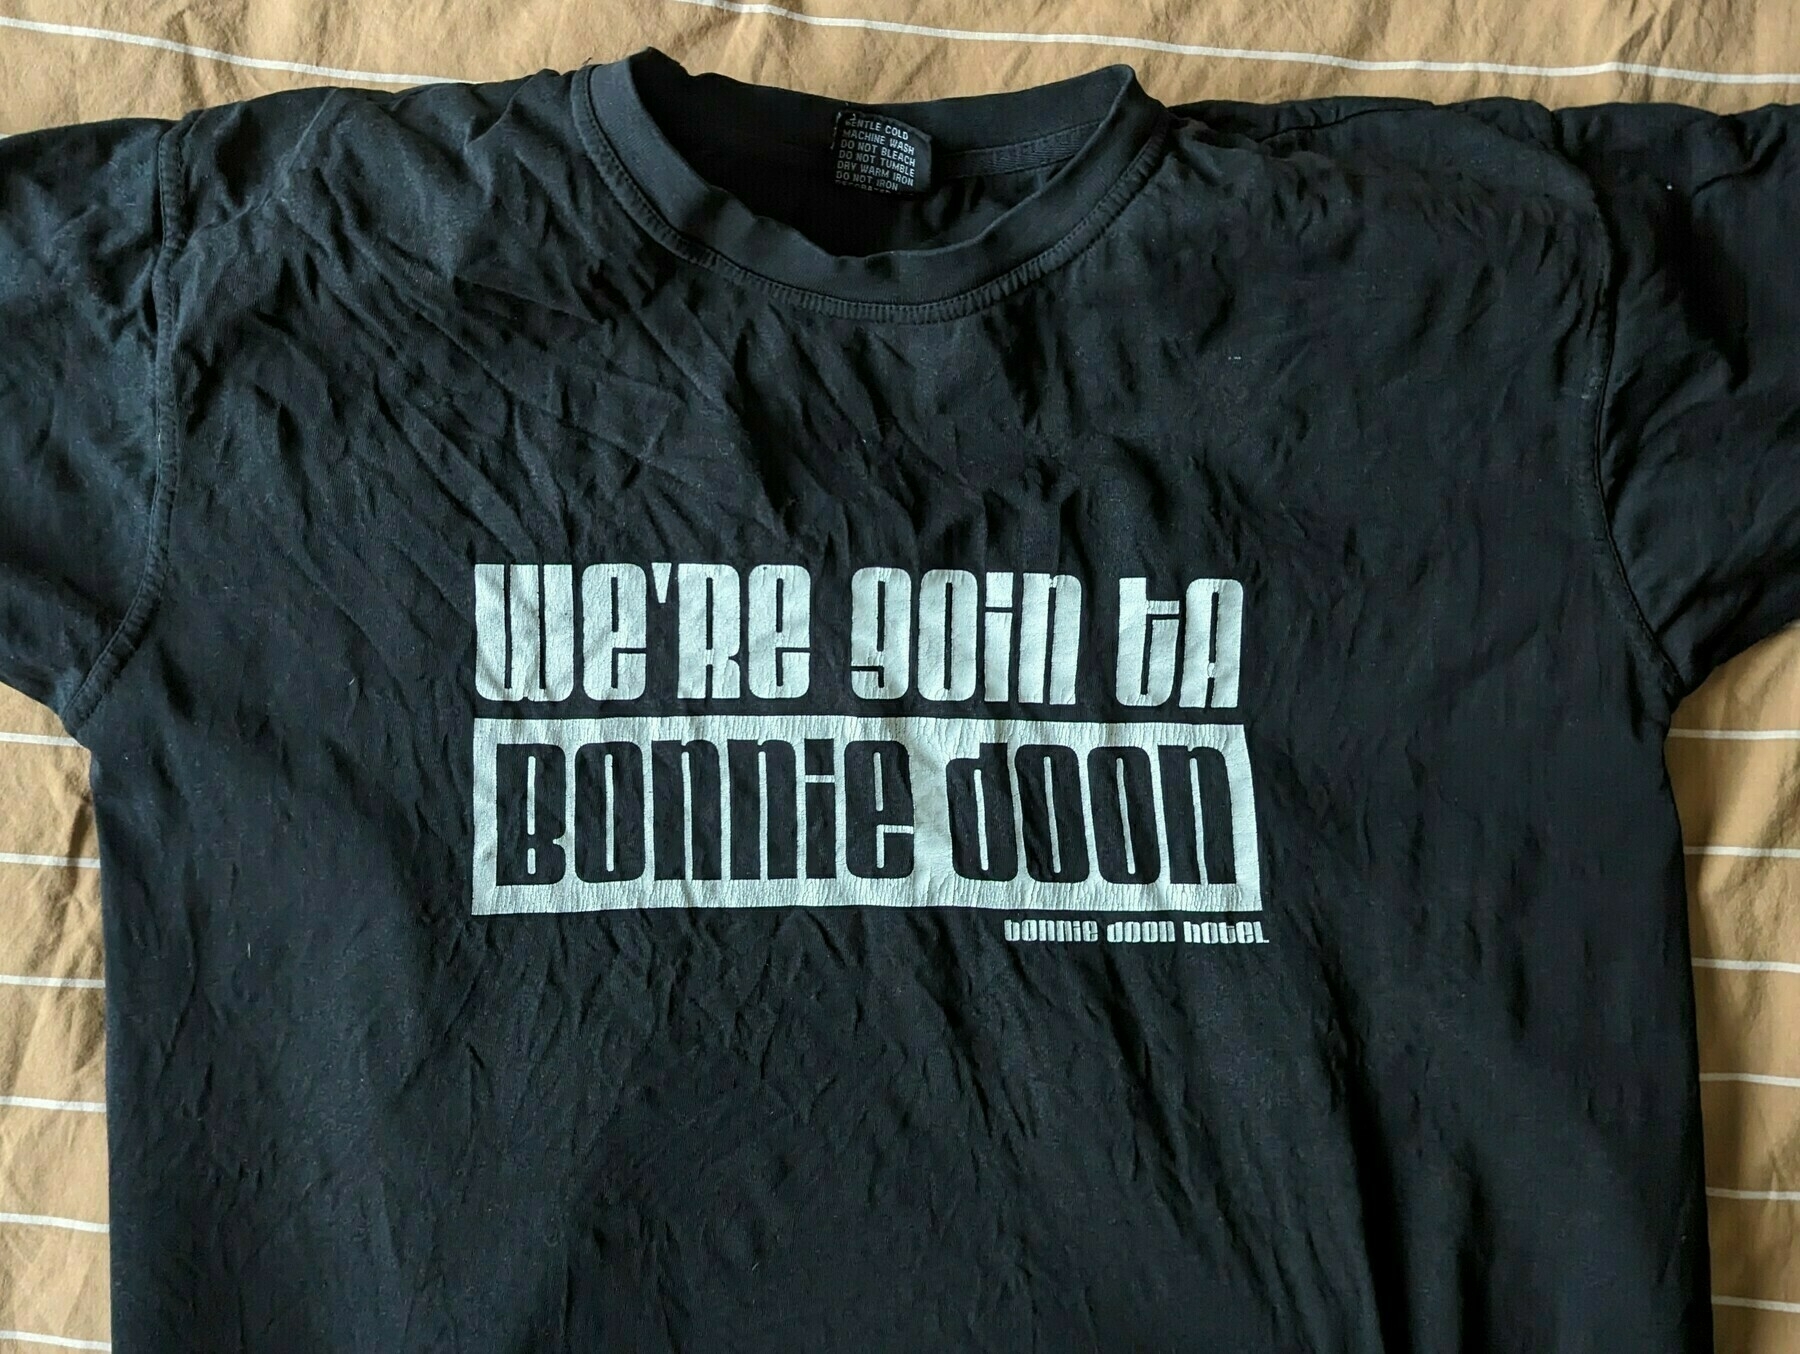 A black T-shirt is displayed with the text 'WE'RE GOIN TA BONNIE DOON' printed on the front in bold white letters, with the line Bonnie Doon Hotel below it on the right.